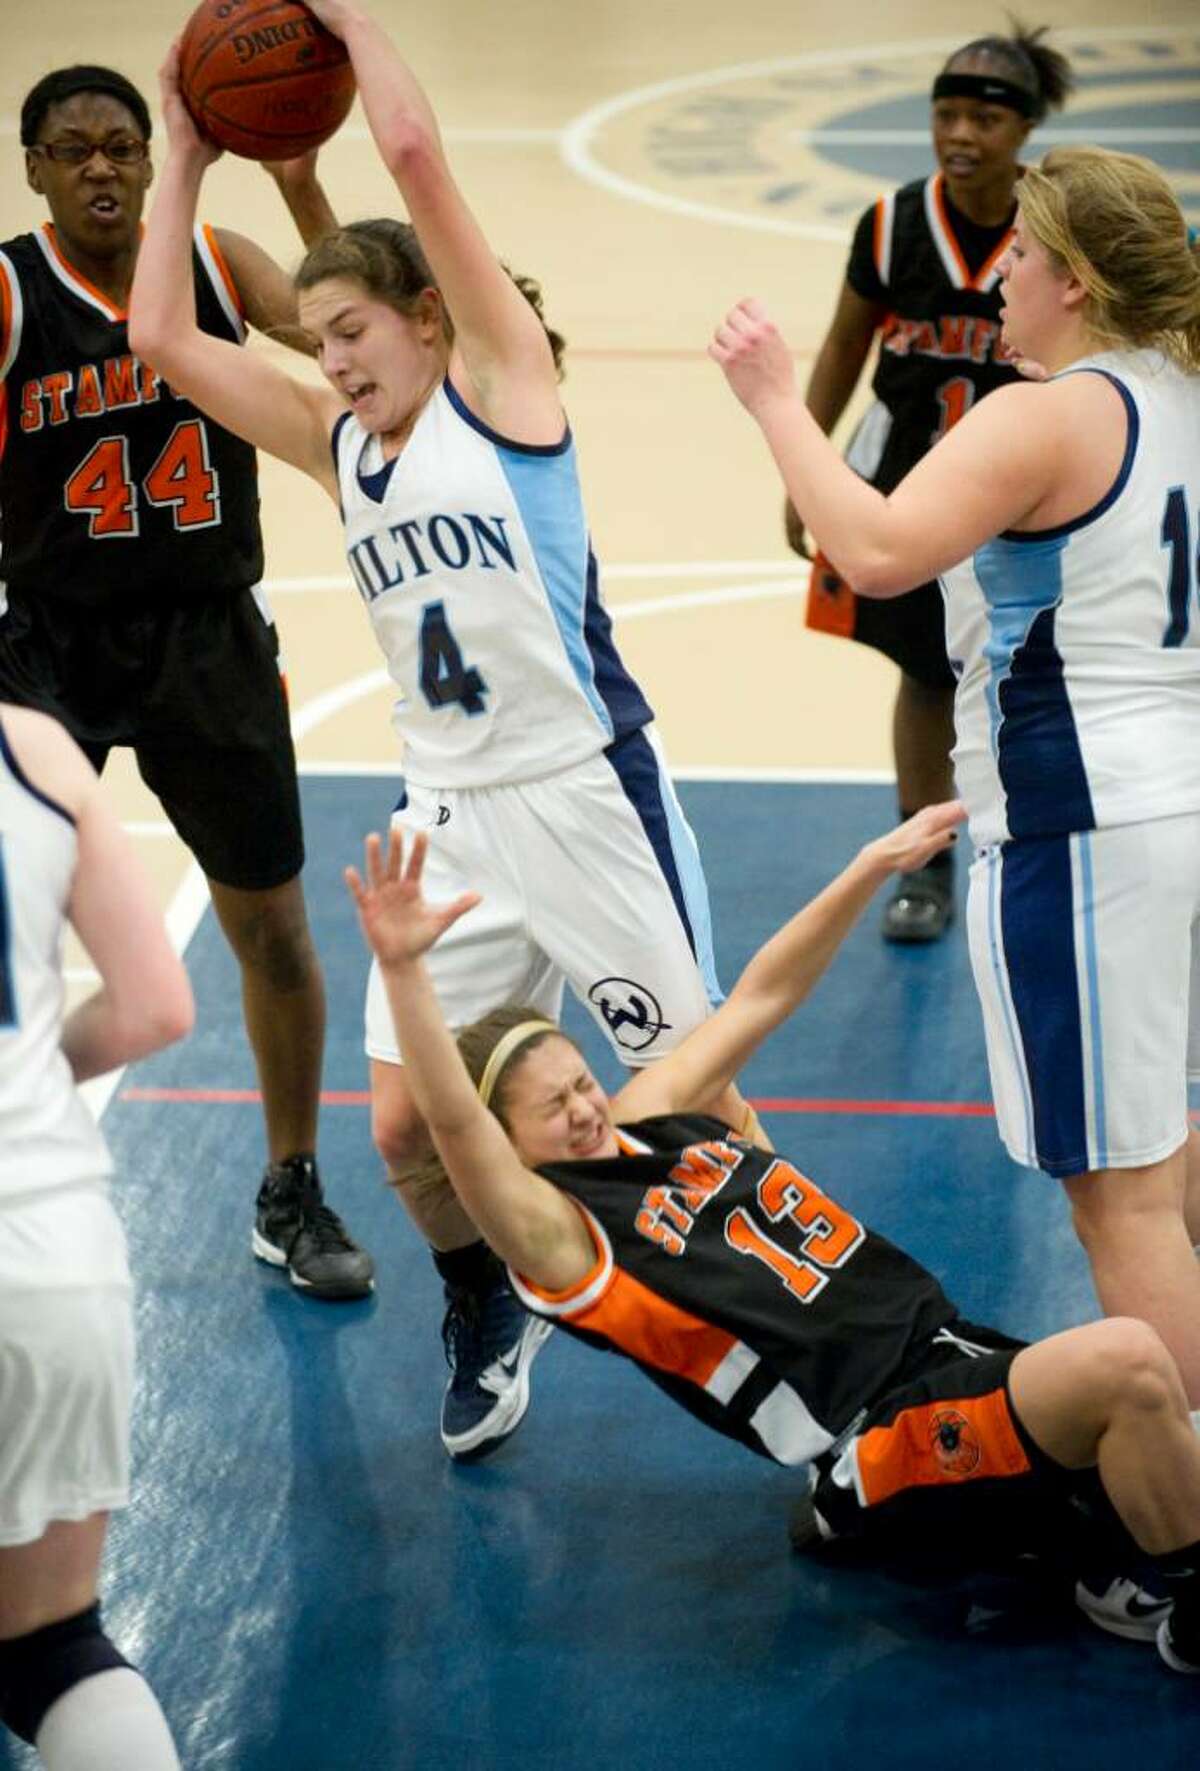 Wilton's Casey Pearsall, left, and Stamford's Kelsey Cognetta tangle over a rebound during an FCIAC girls basketball game at Wilton High School in Wilton, Conn. on Thursday, Jan. 21, 2010.